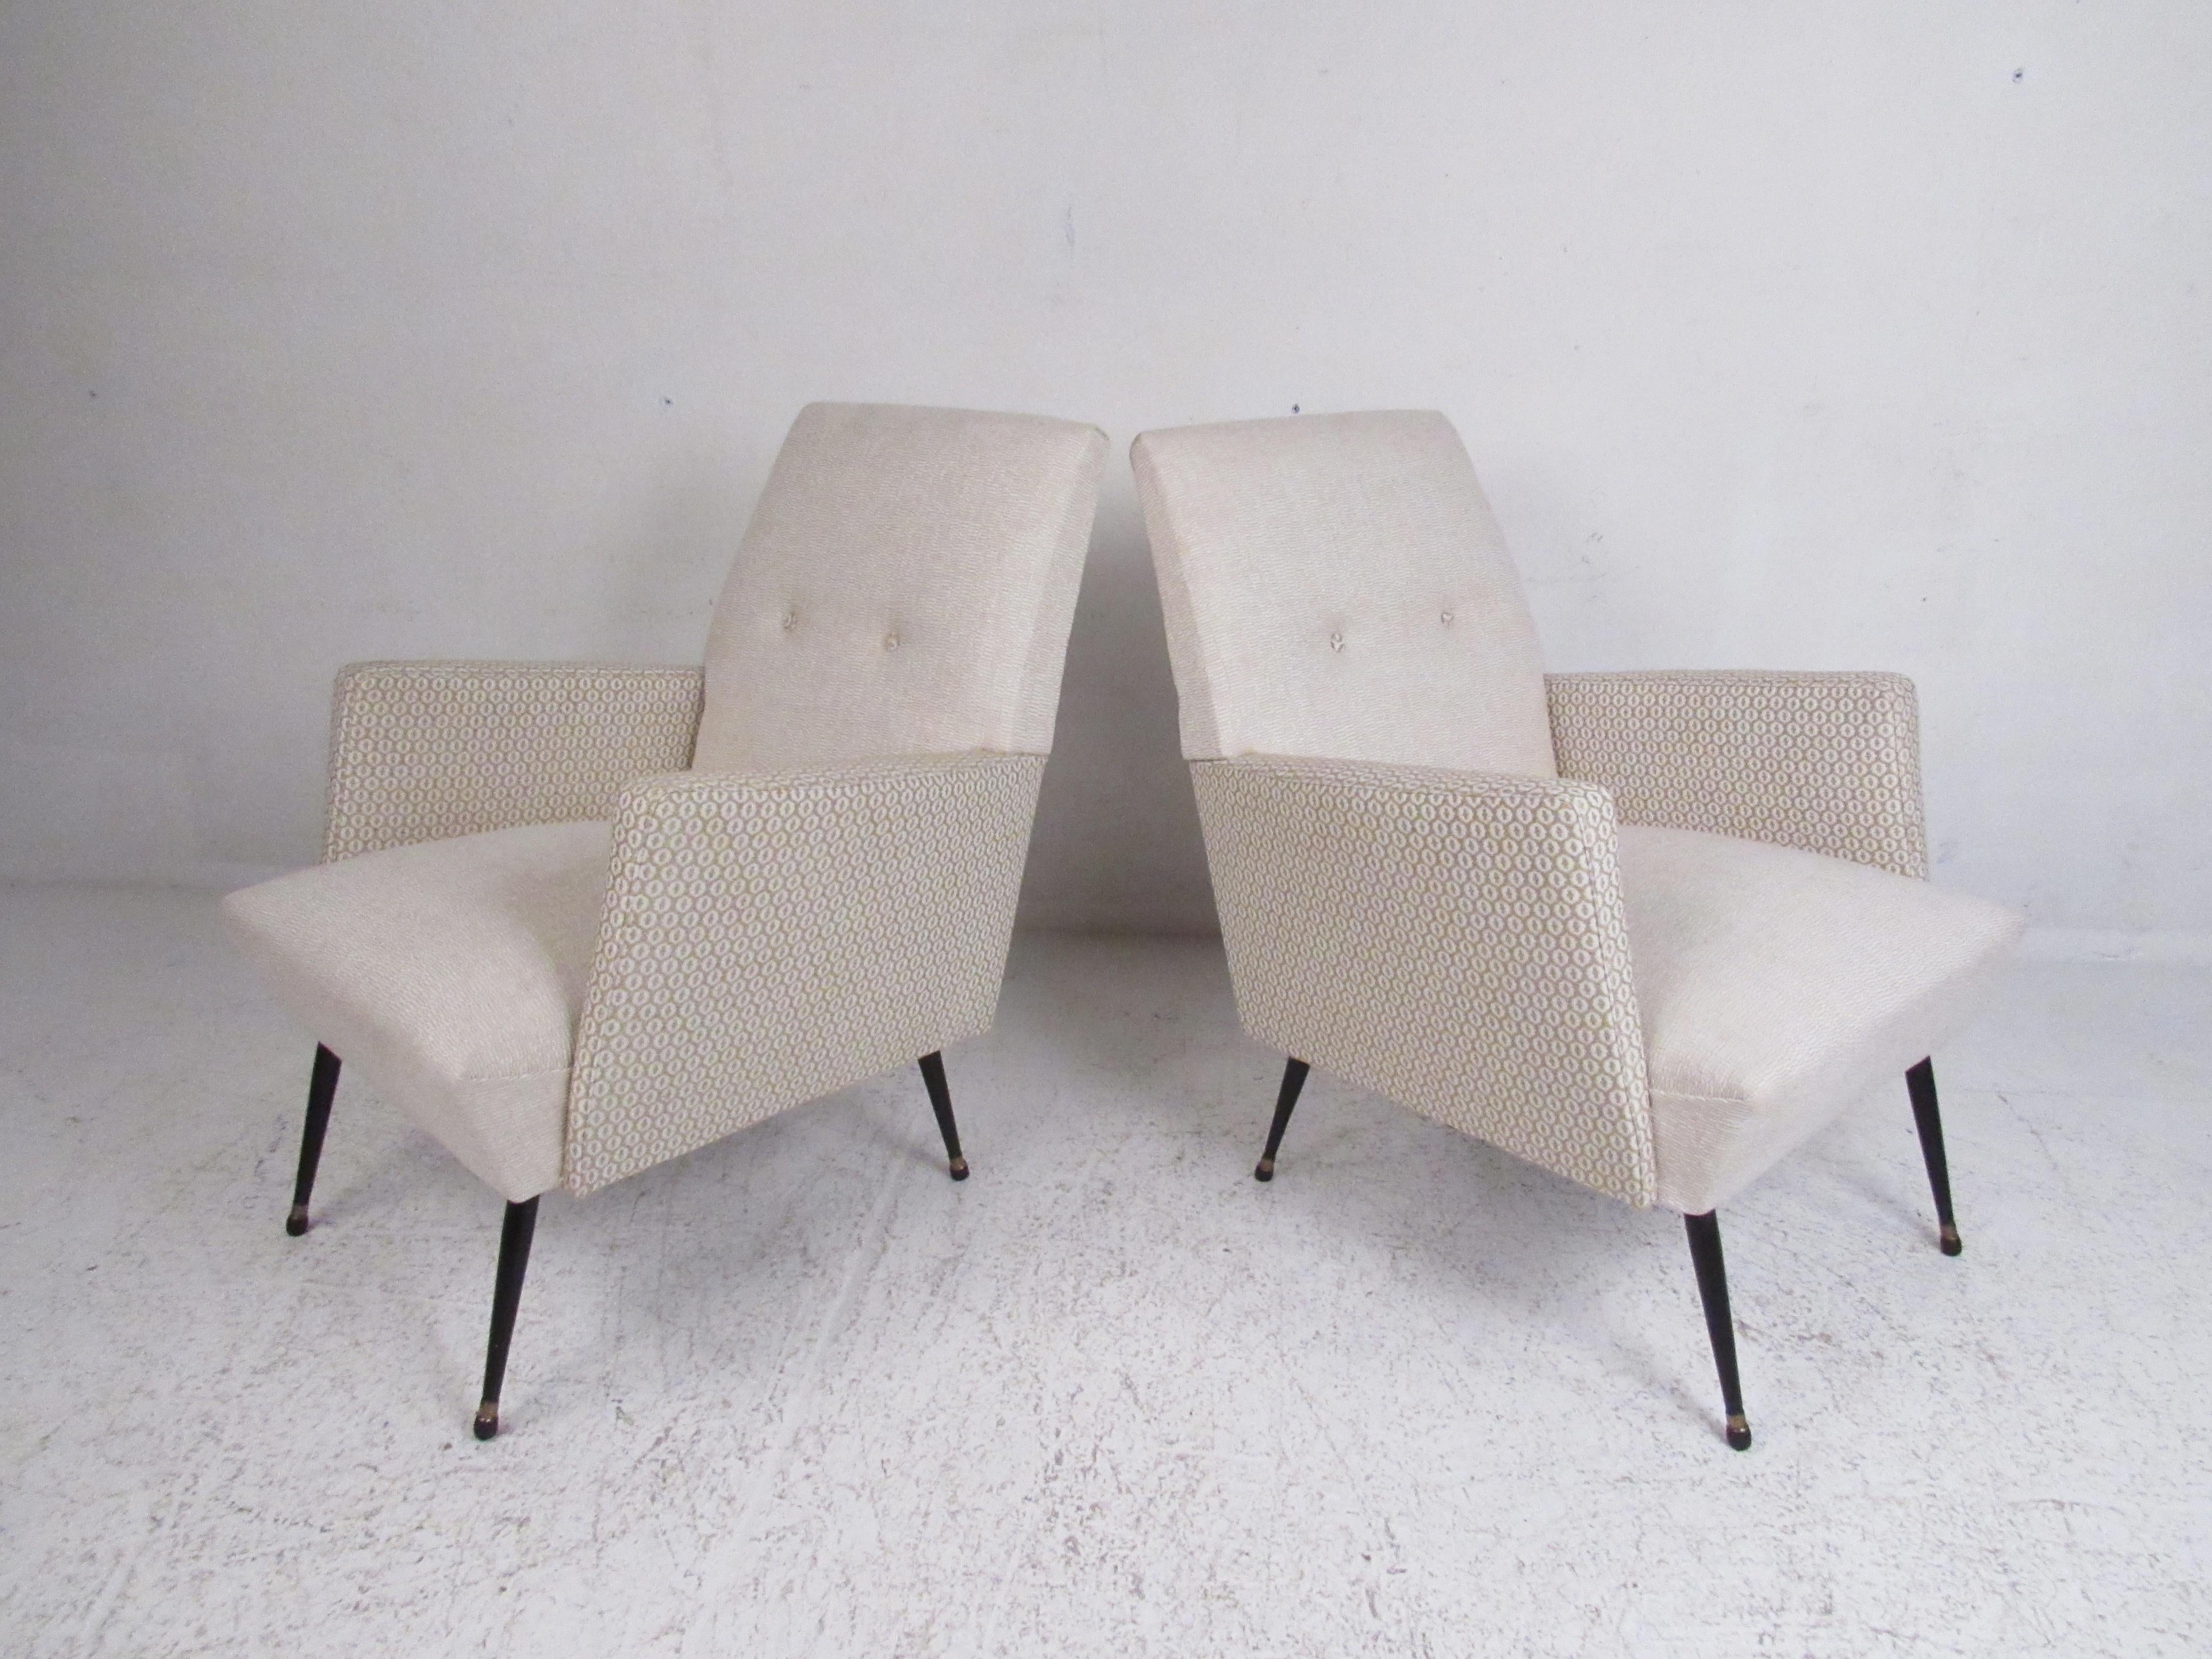 This beautiful pair of vintage modern armchairs feature cream-colored fabric with decorative armrests. The plush upholstery, tufted backrest, and splayed legs add to the midcentury appeal. This stylish pair of chairs make the perfect addition to any